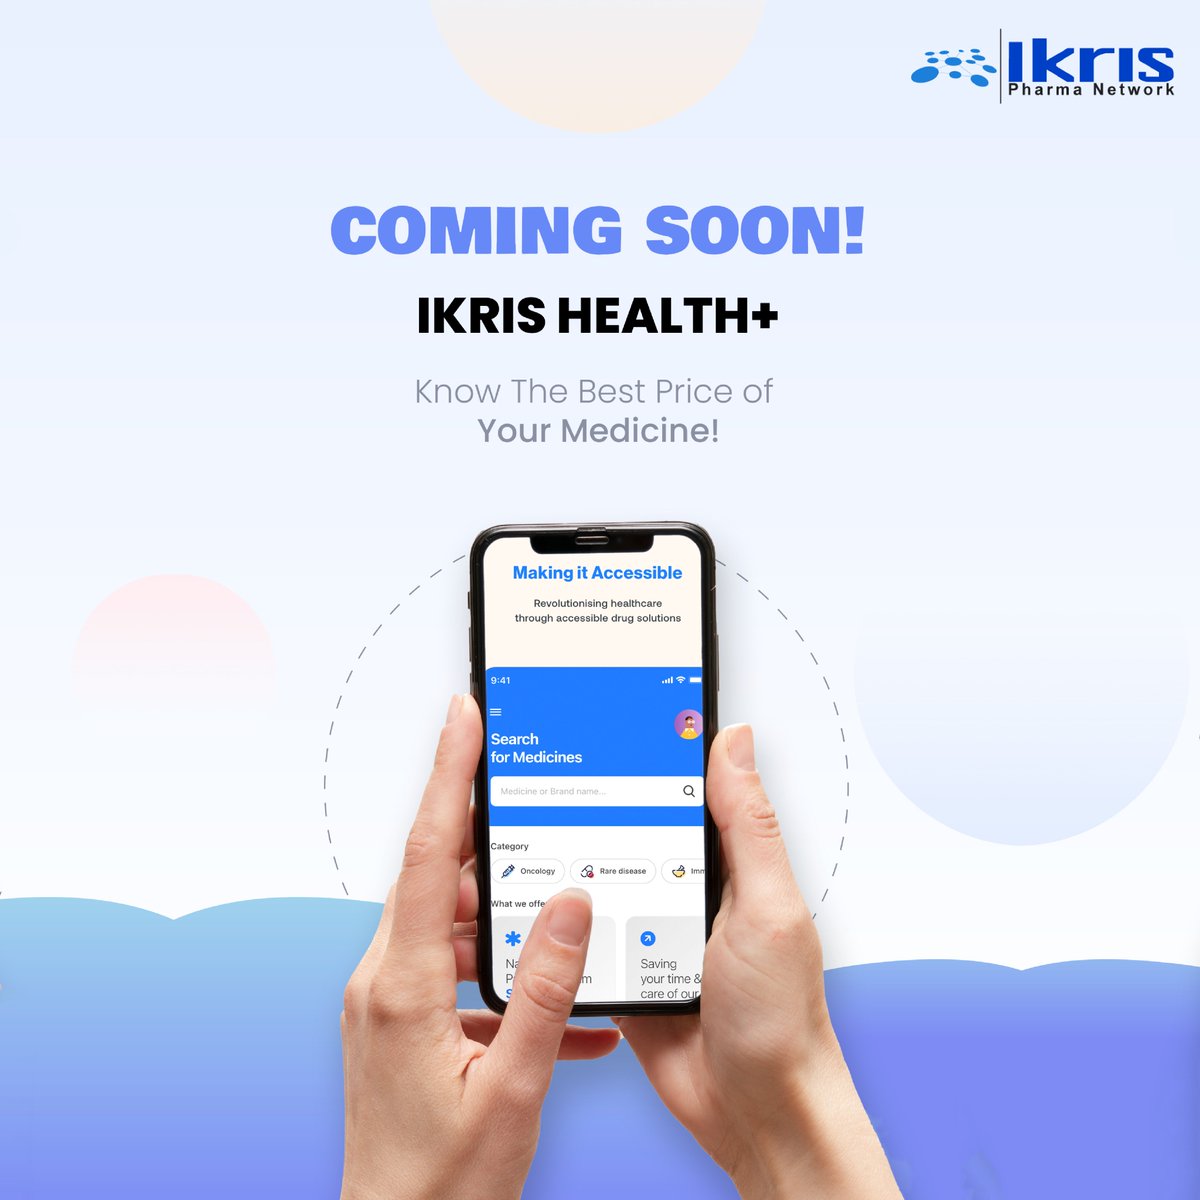 Coming Soon! Ikris Health+ App

After several months of intense juggling and hard work, we are happy to announce the upcoming launch of Ikris Health+ App.

Stay Tuned for more updates!

#ikrispharmanetwork #healthcare #pharmaceutical #pharmainnovation #medicine #suppliers